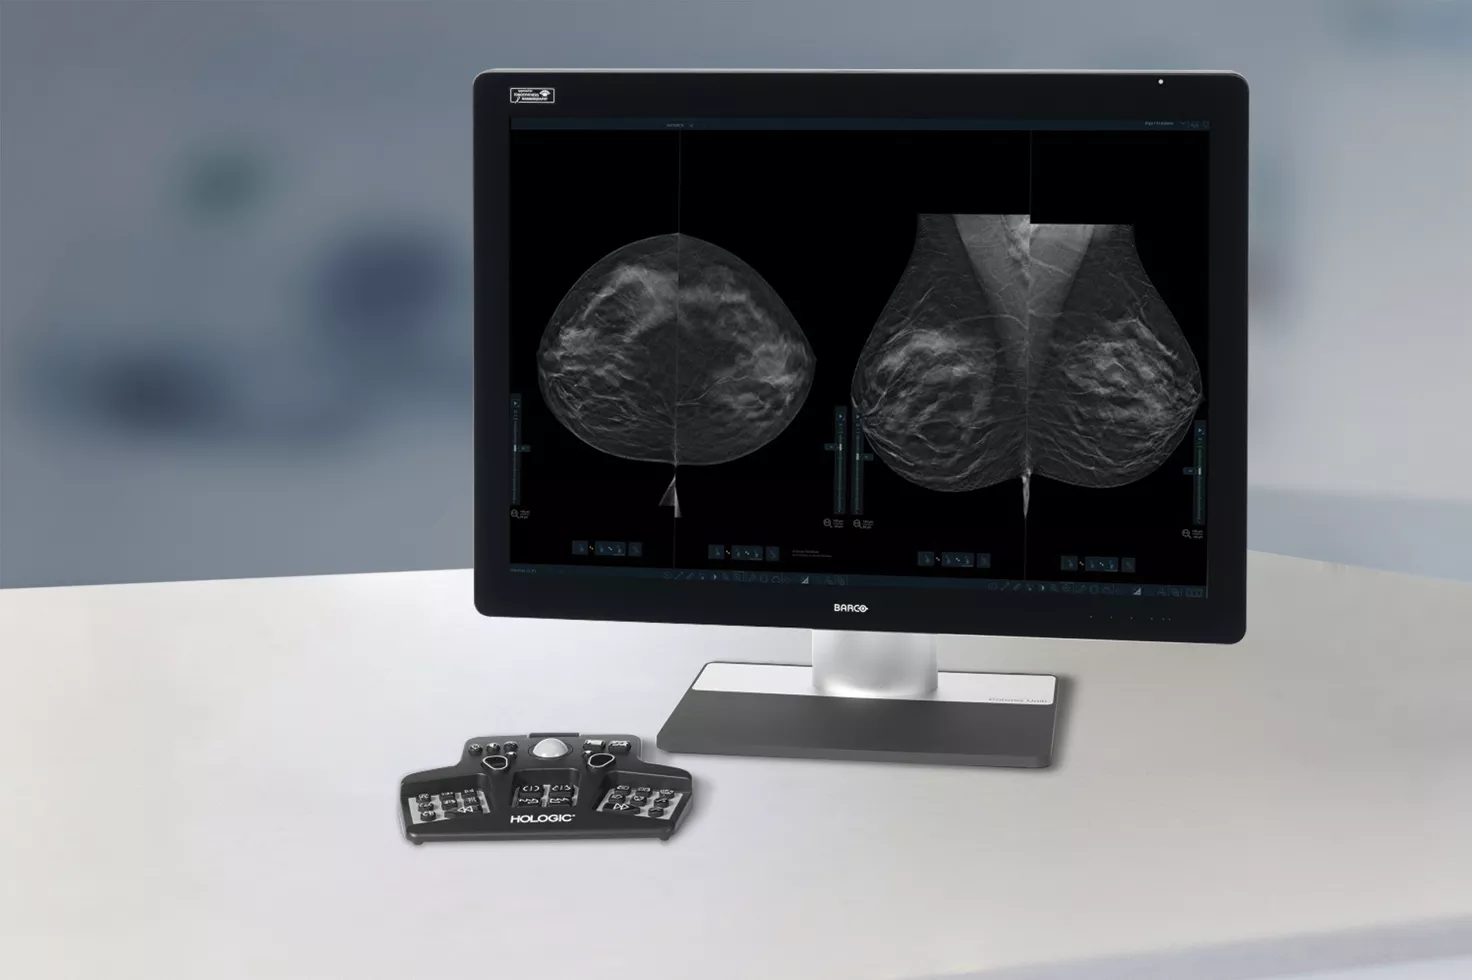 3DQuorum™ Imaging Technology on table in lab setting